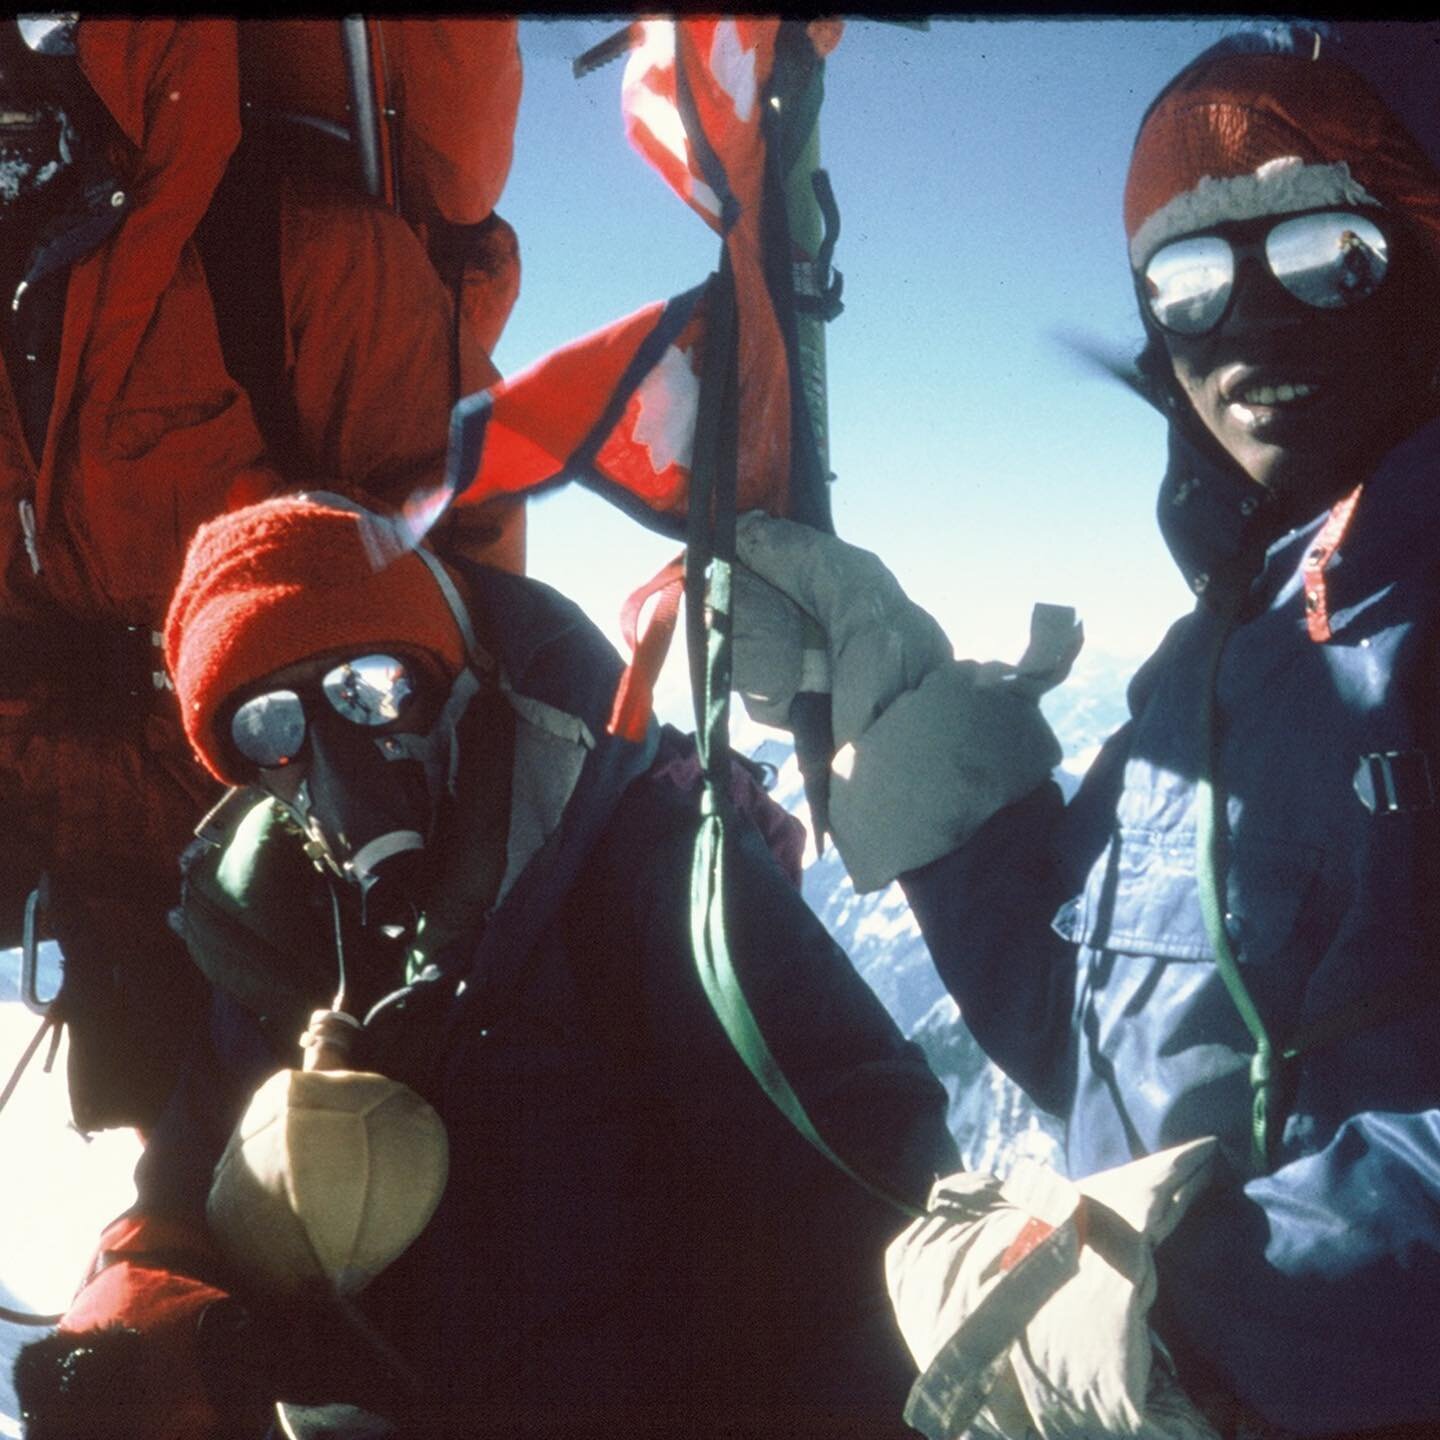 On a 1961 expedition to Makulu, Edmund Hillary forbade Irene Beardsley to step foot on the mountain, despite her impressive mountaineering resume, including ascents in the Tetons and Peru. But Irene was hungry for summits, regardless of being relegat